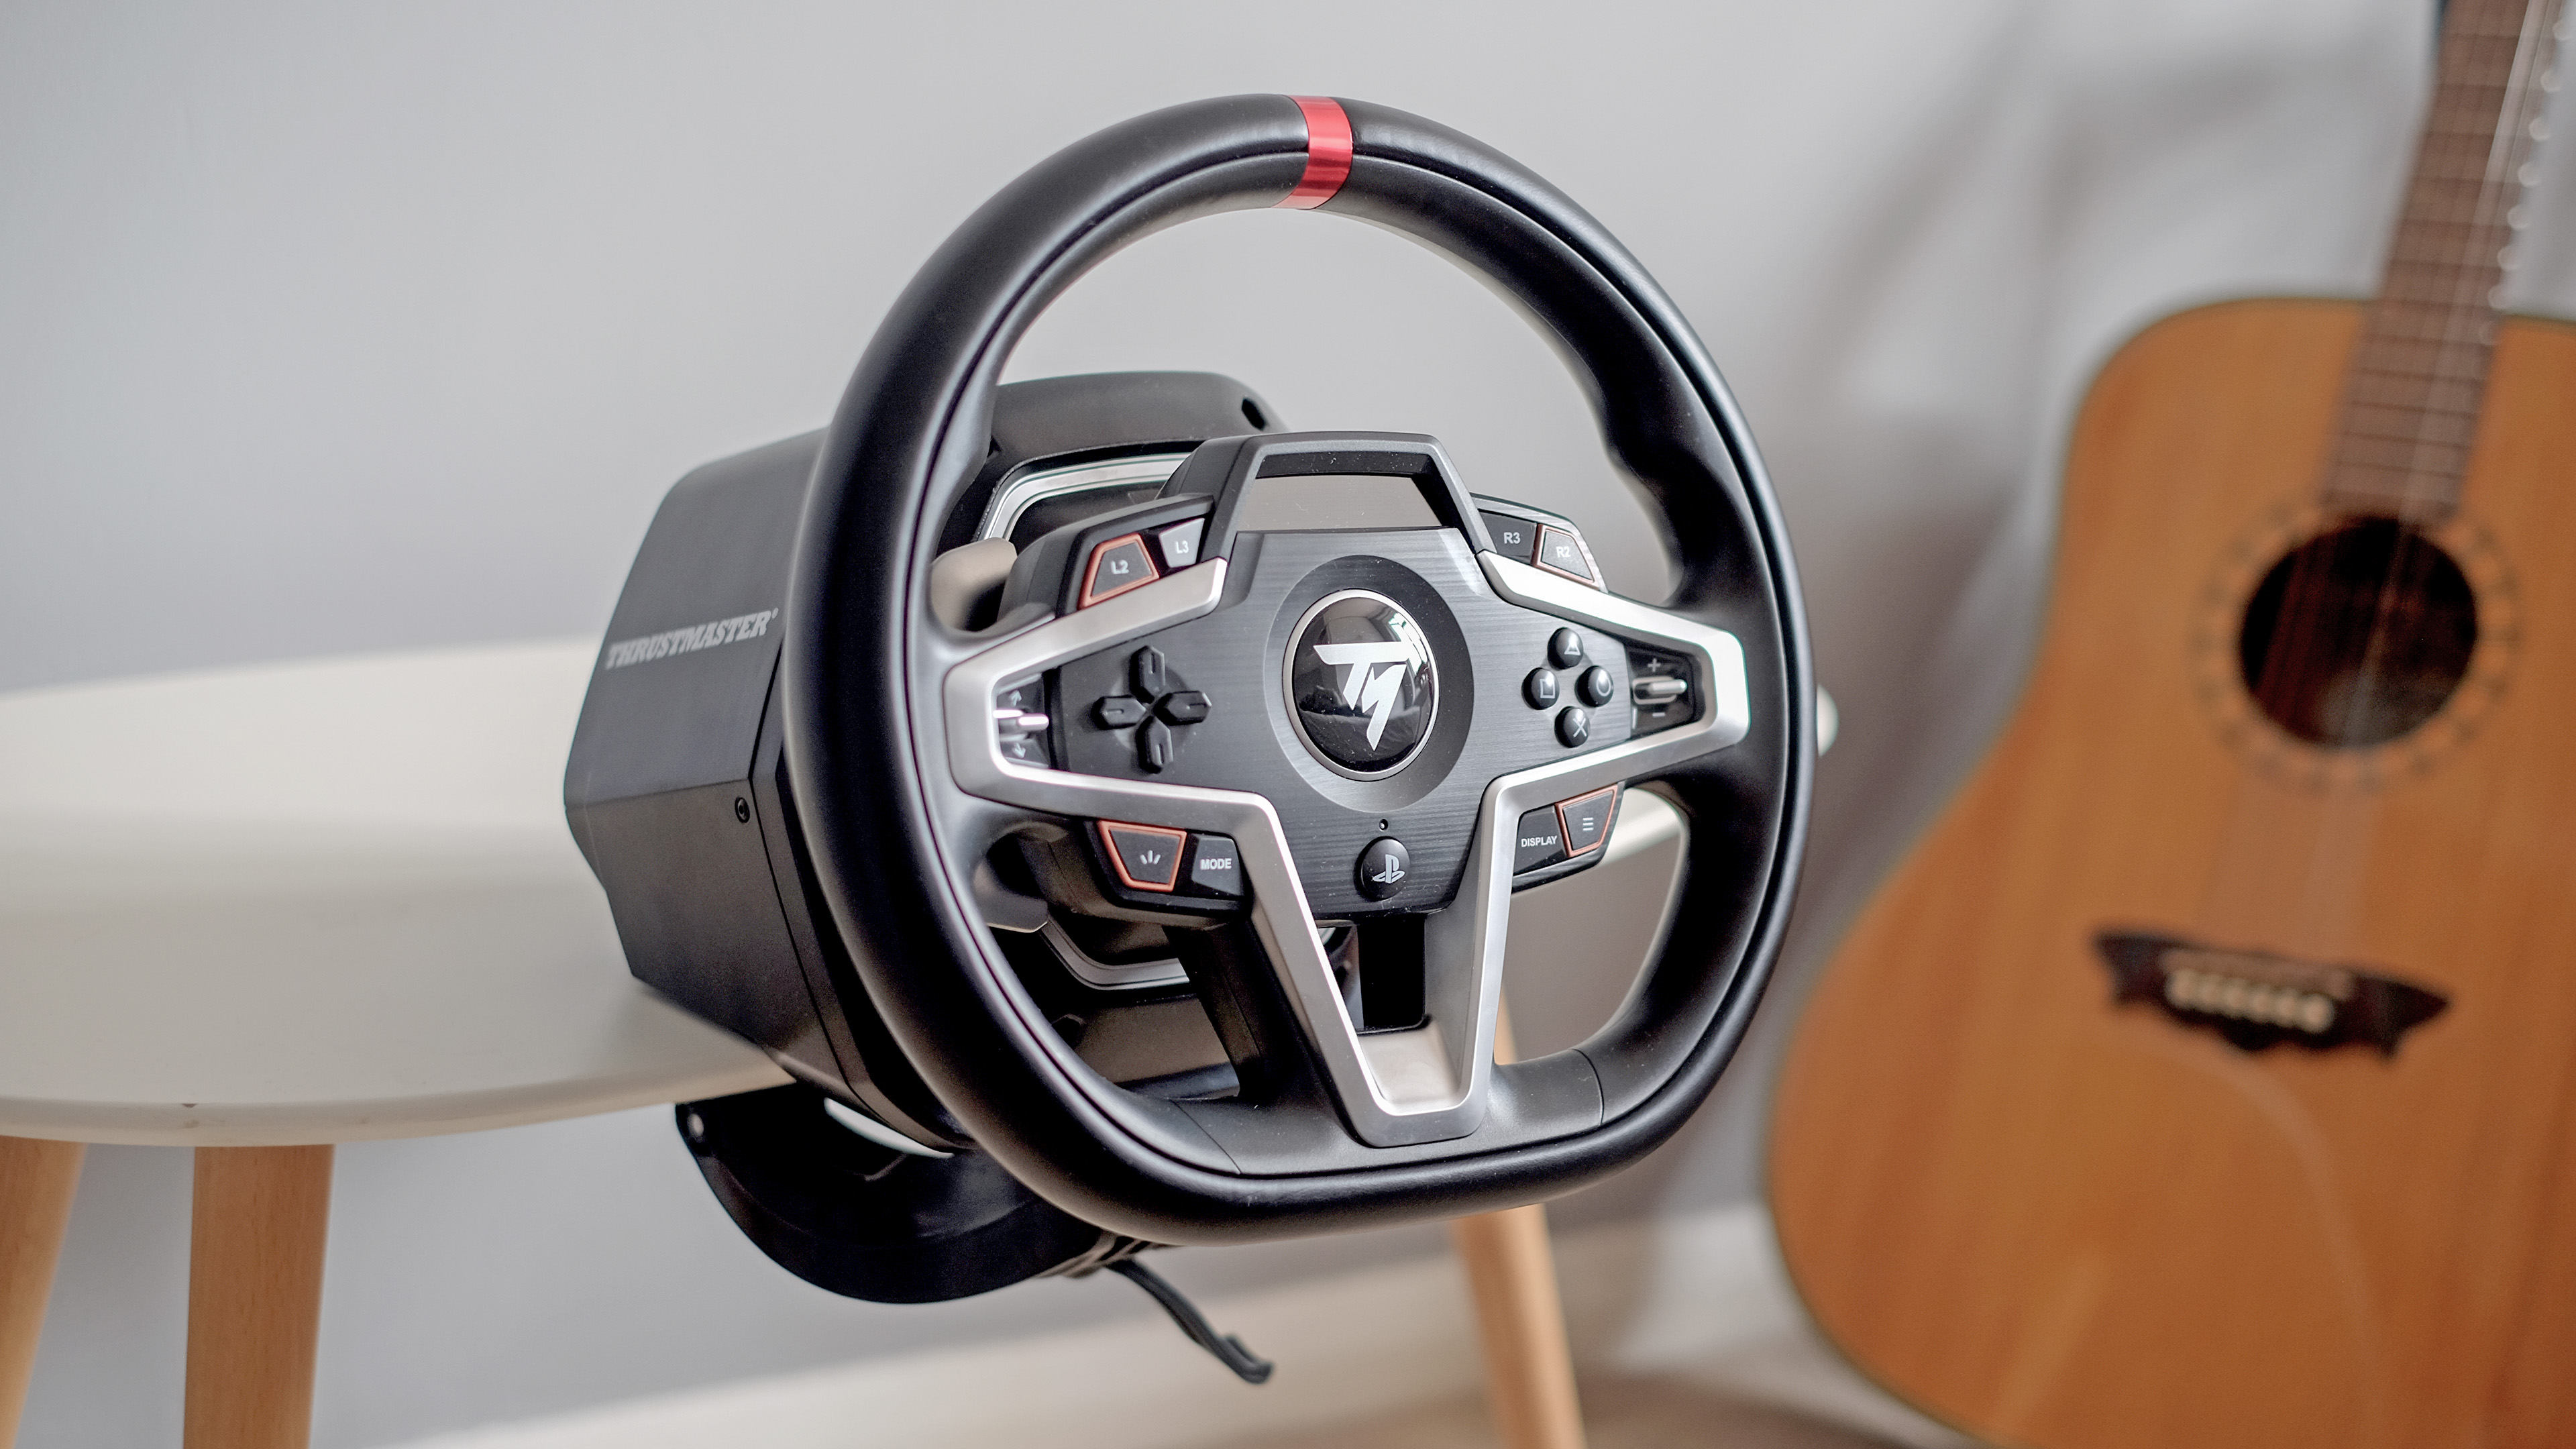 Thrustmaster T248 review: entry-level excellence